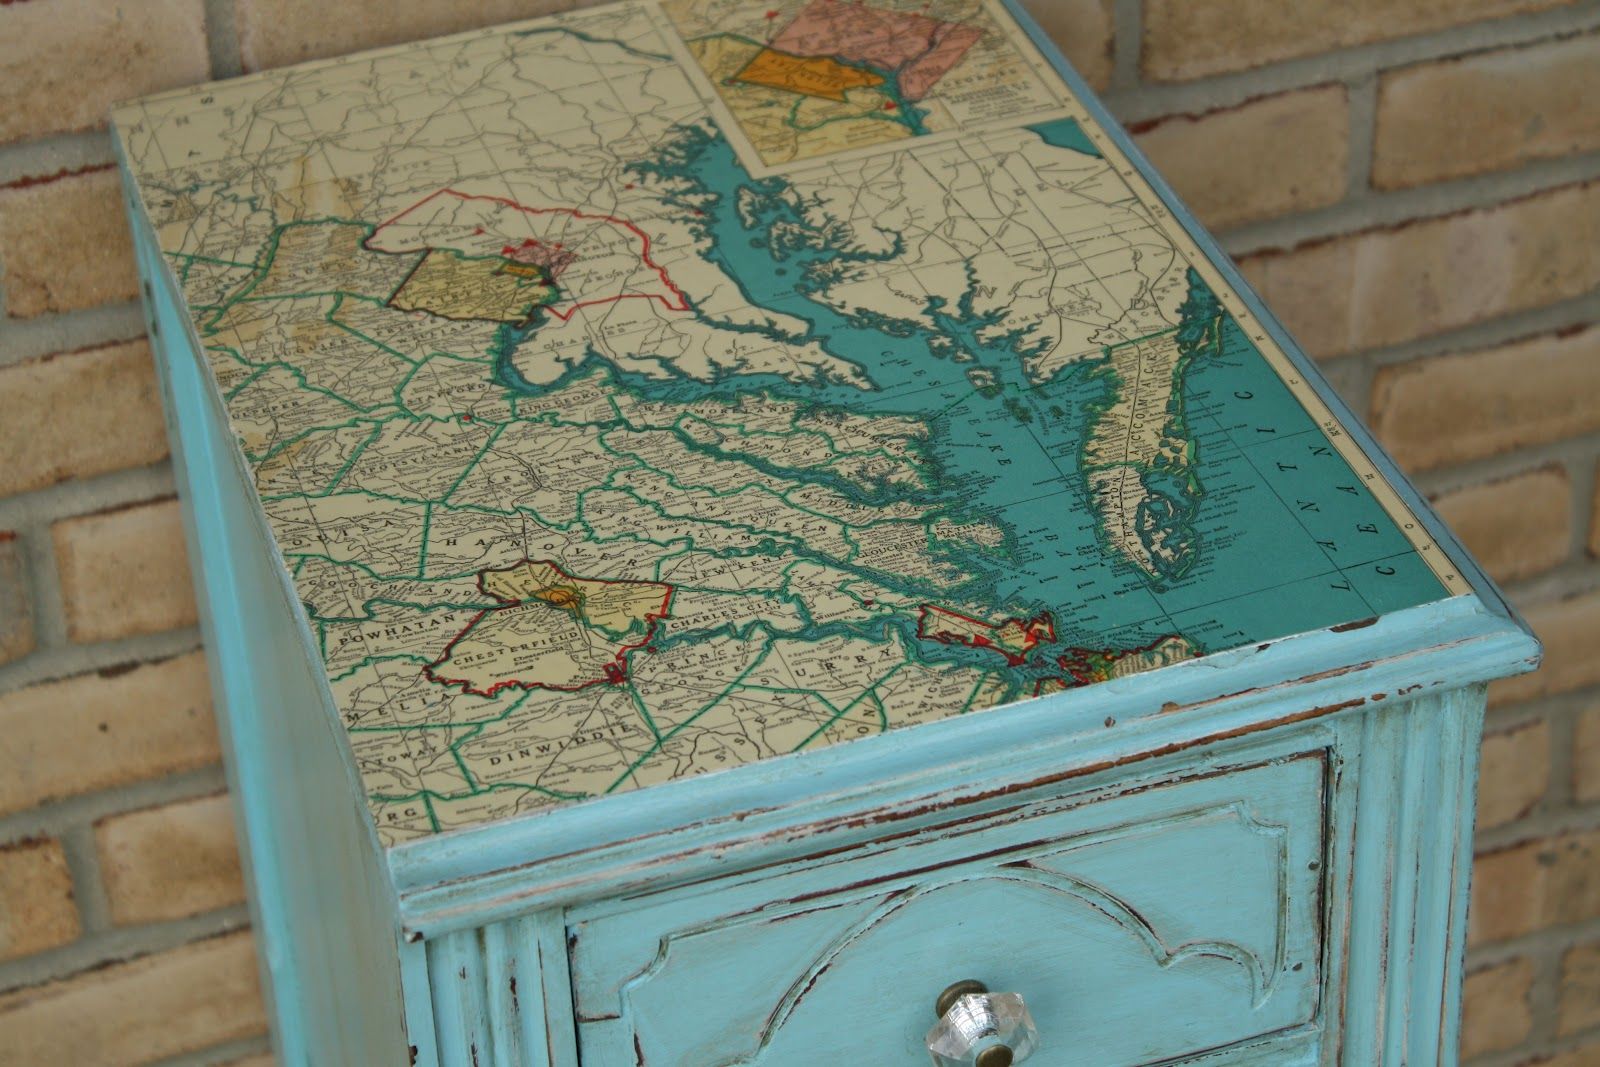 Mod Podge a map to a tabletop.